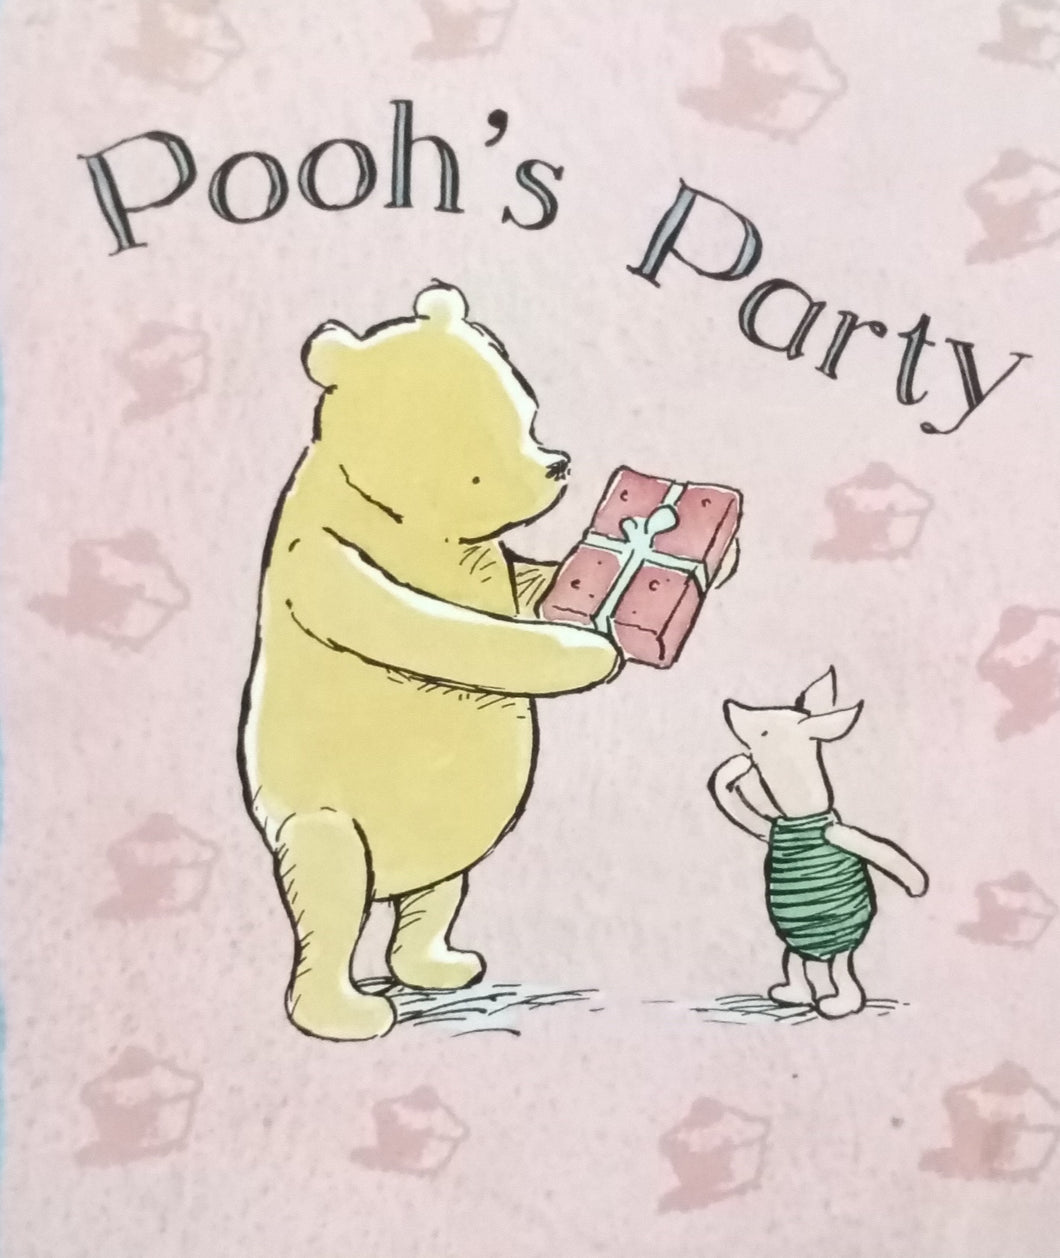 Pooh's Party by Egmont